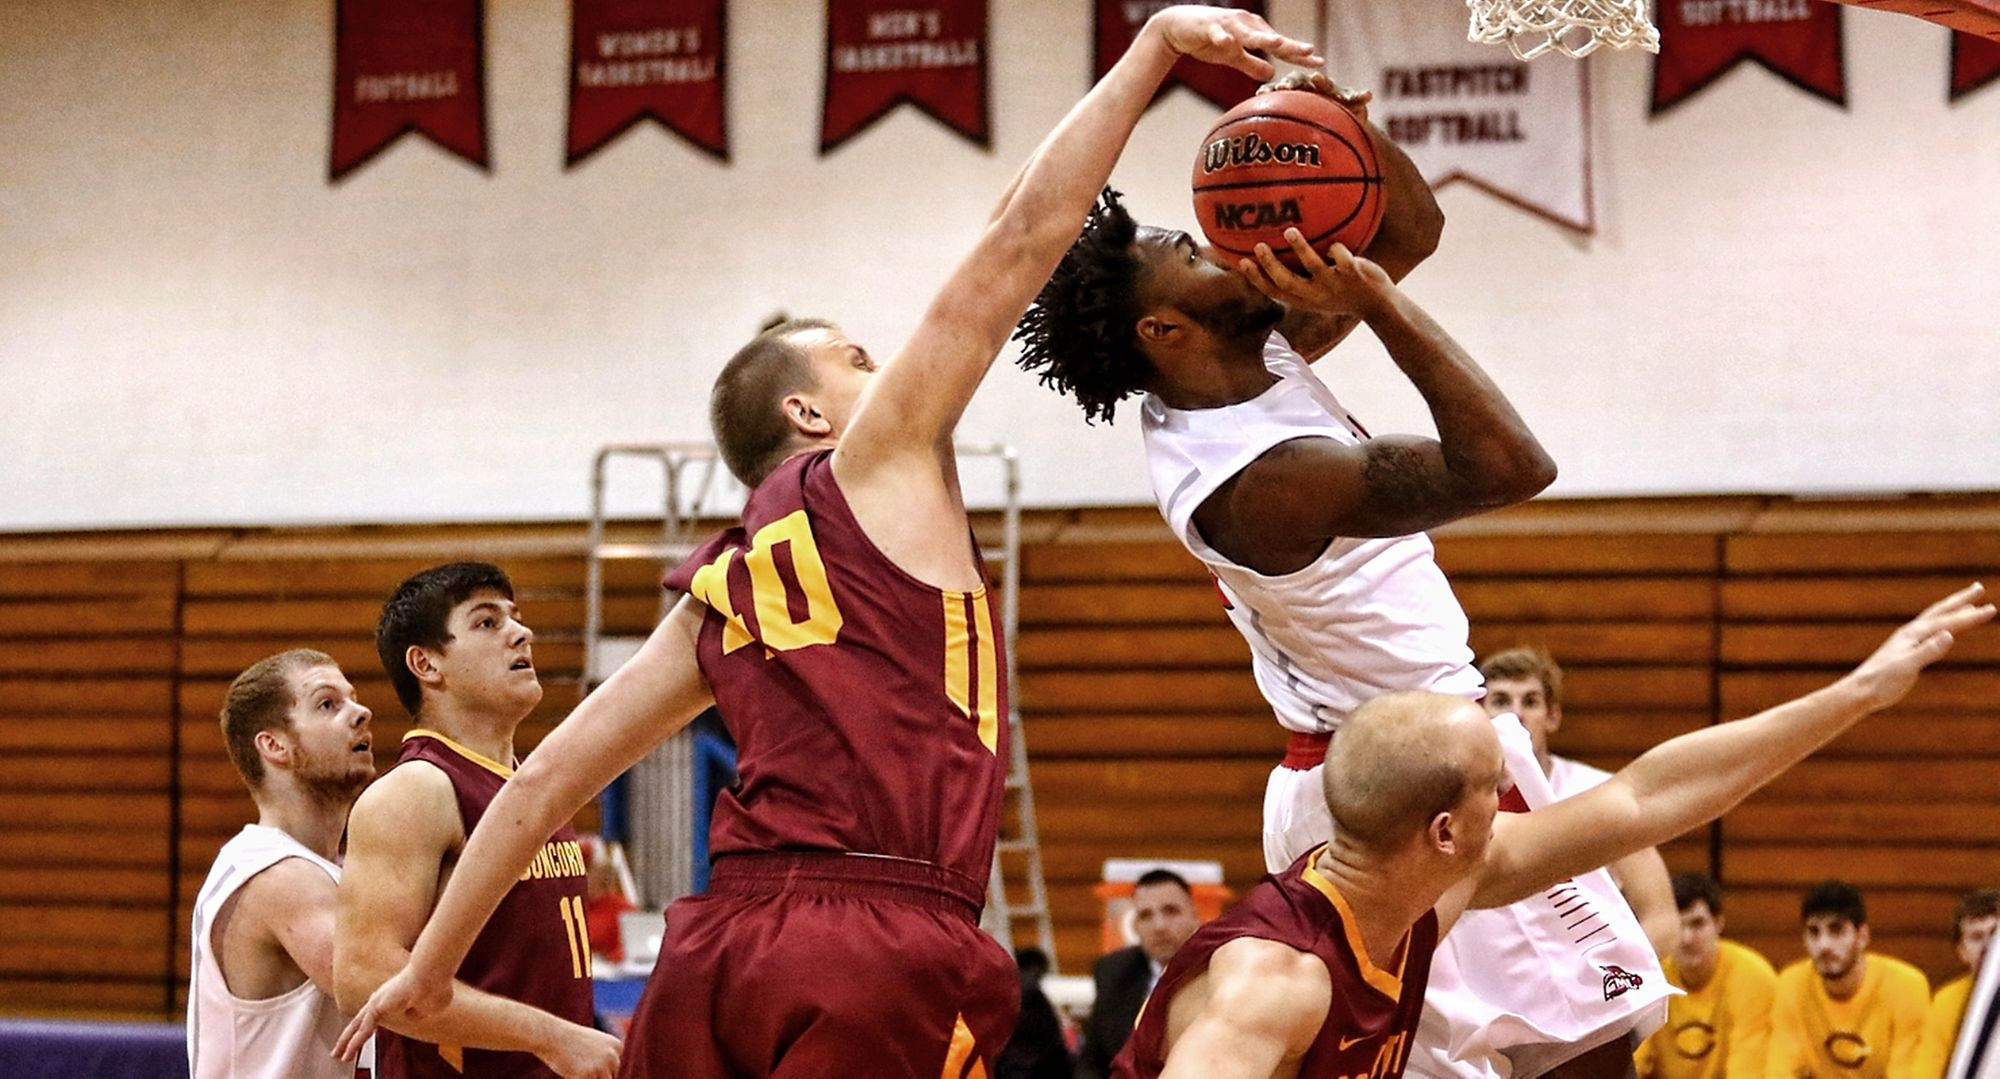 Junior Austin Heins goes for the block in the Cobbers' win at St. Mary's. Heins had 13 points in the team's third win of the year. (Photo courtesy of Ryan Coleman, D3photography.com)